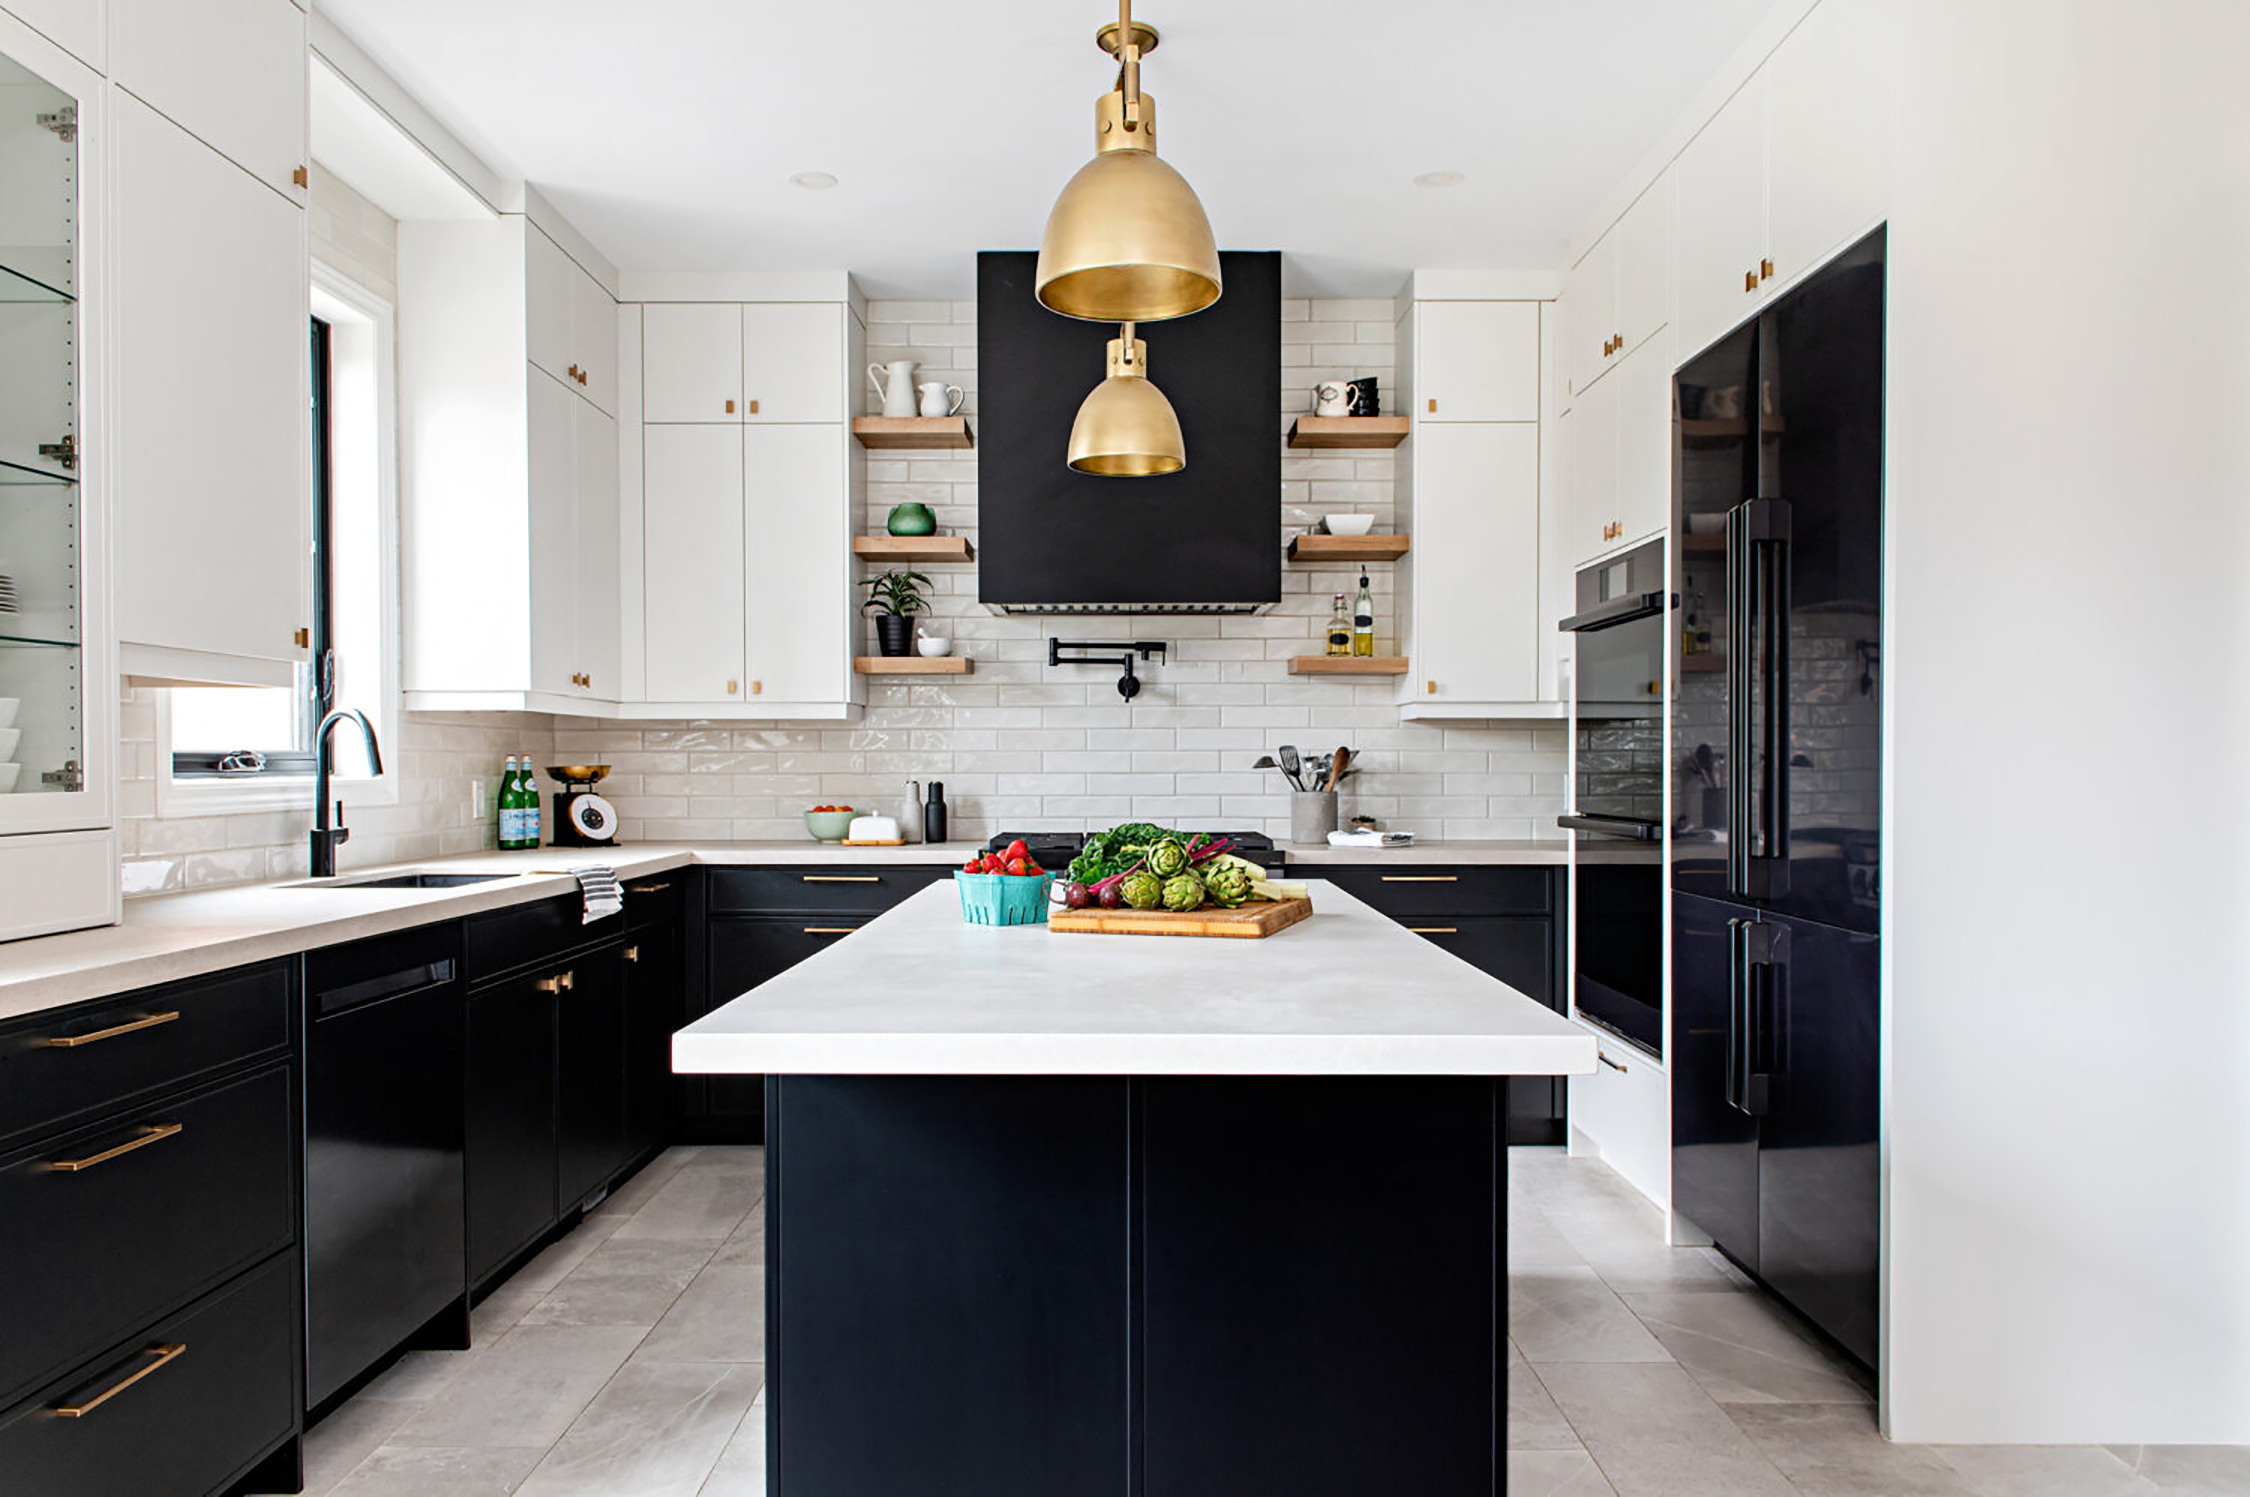 Contemporary black and white tones in a kitchen featuring tile floor, marble countertop, white cabinets, gold light fixtures.